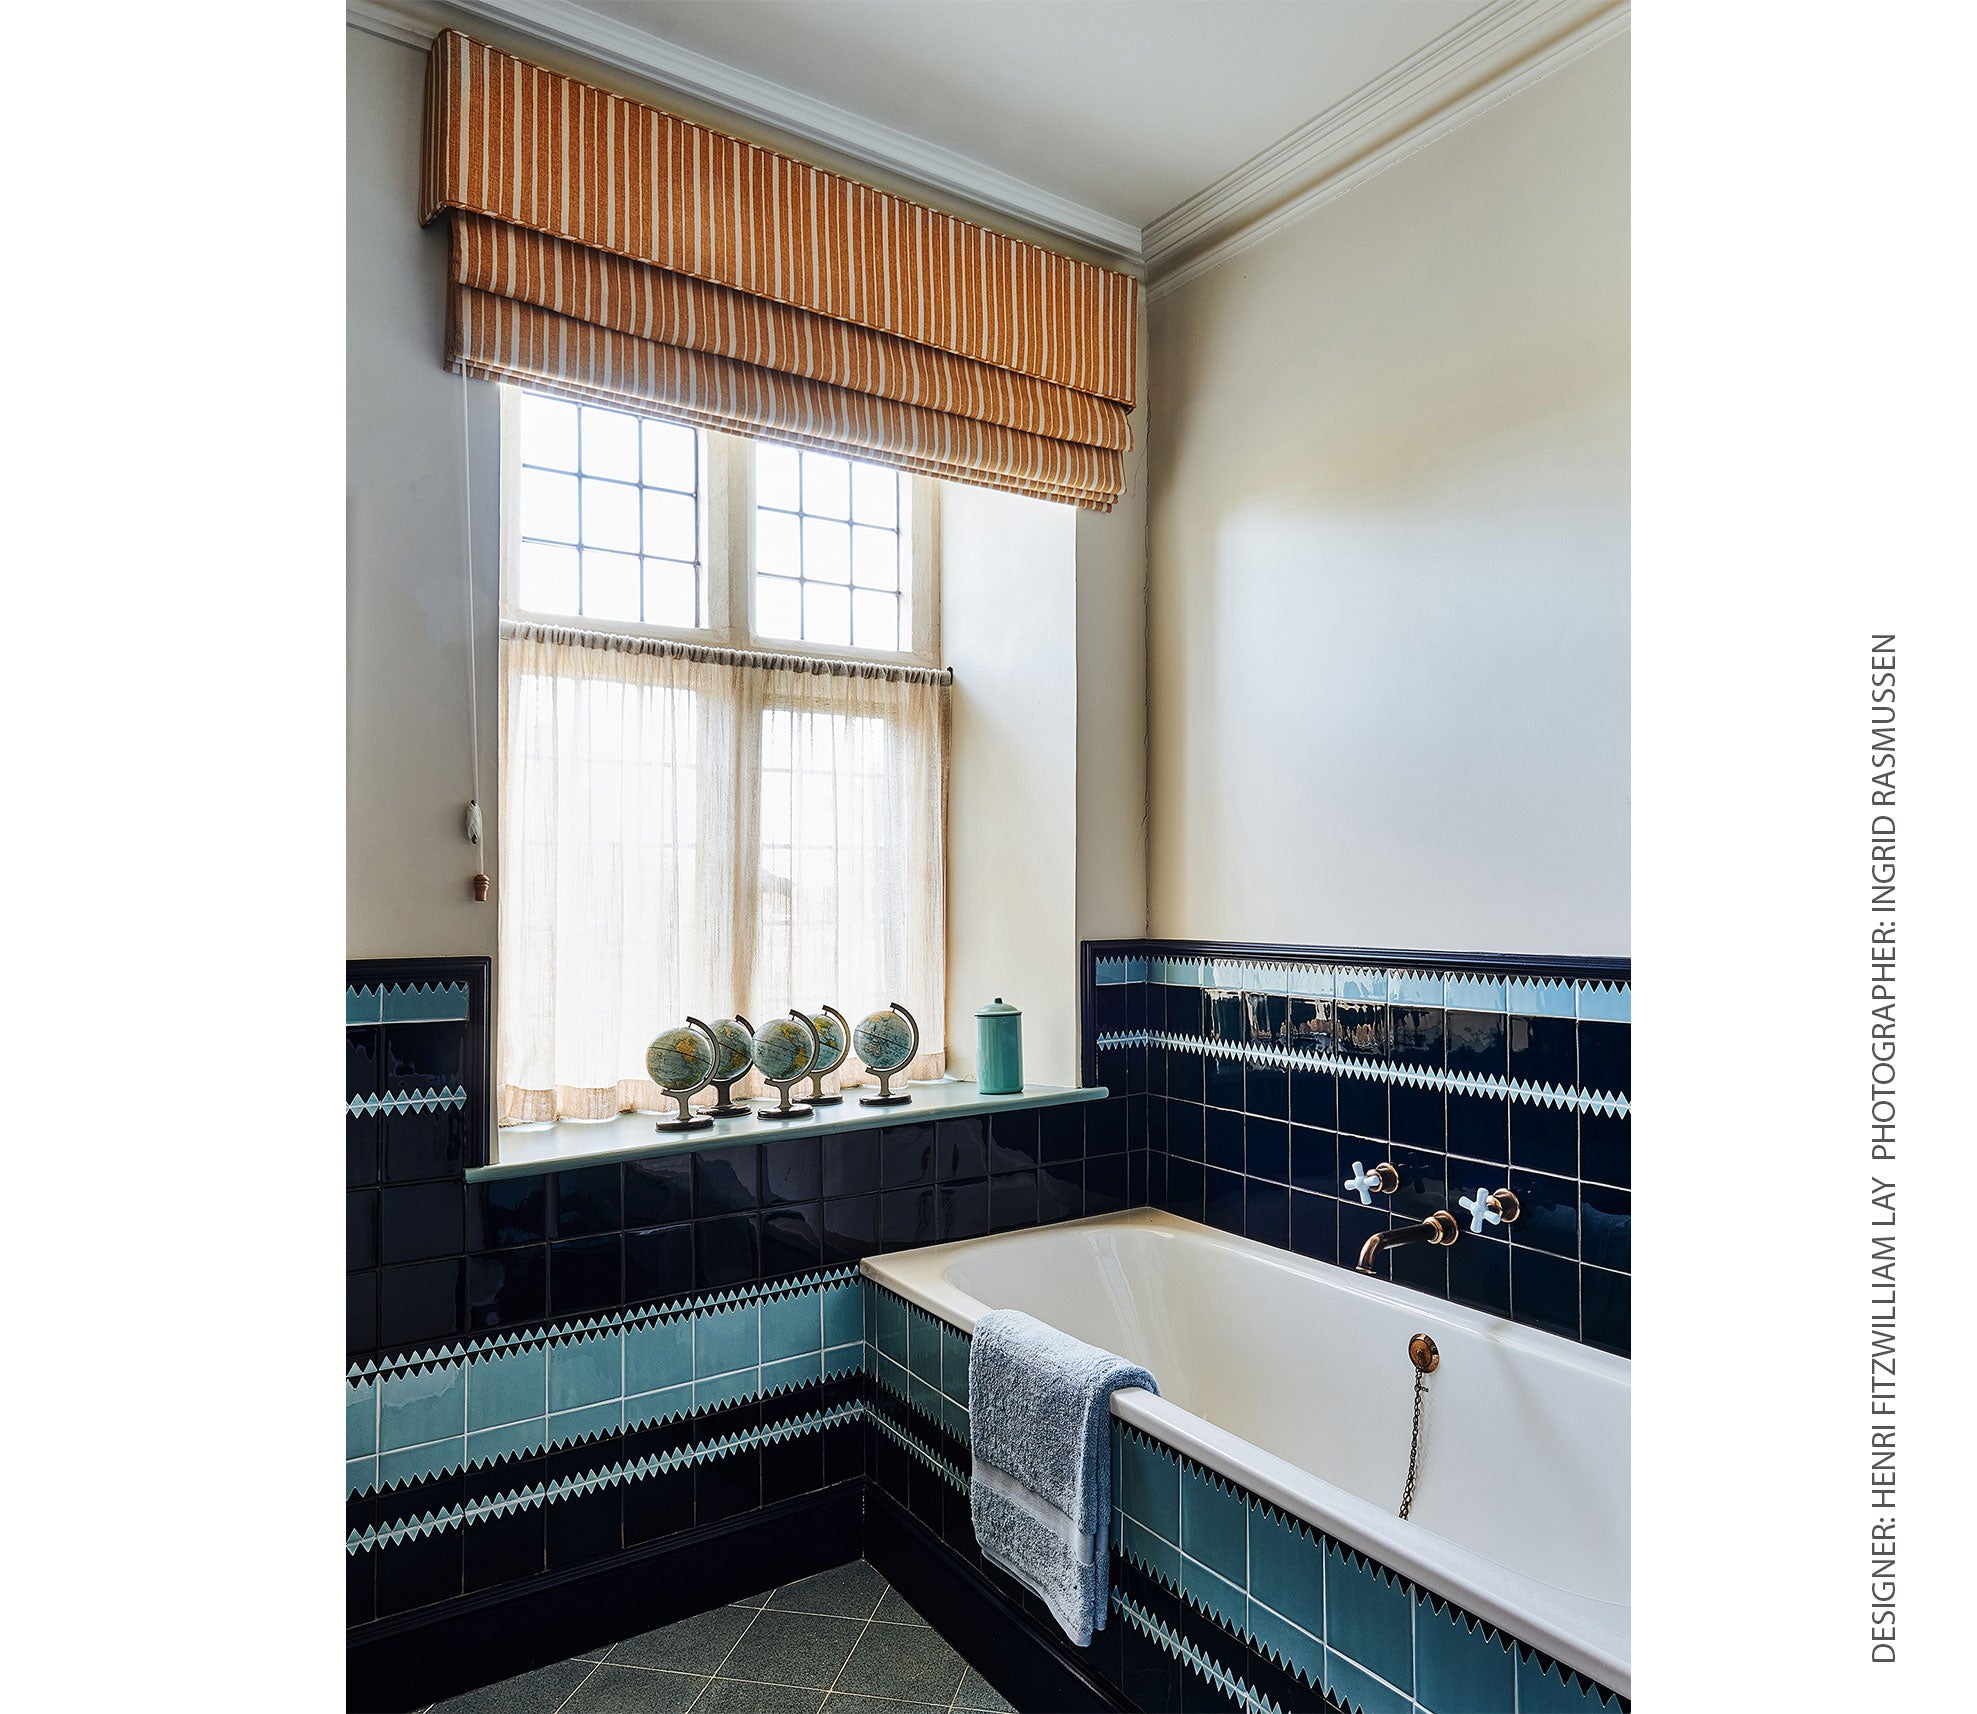 Hanley Tube Lined Decorative Tiles Product Image 5